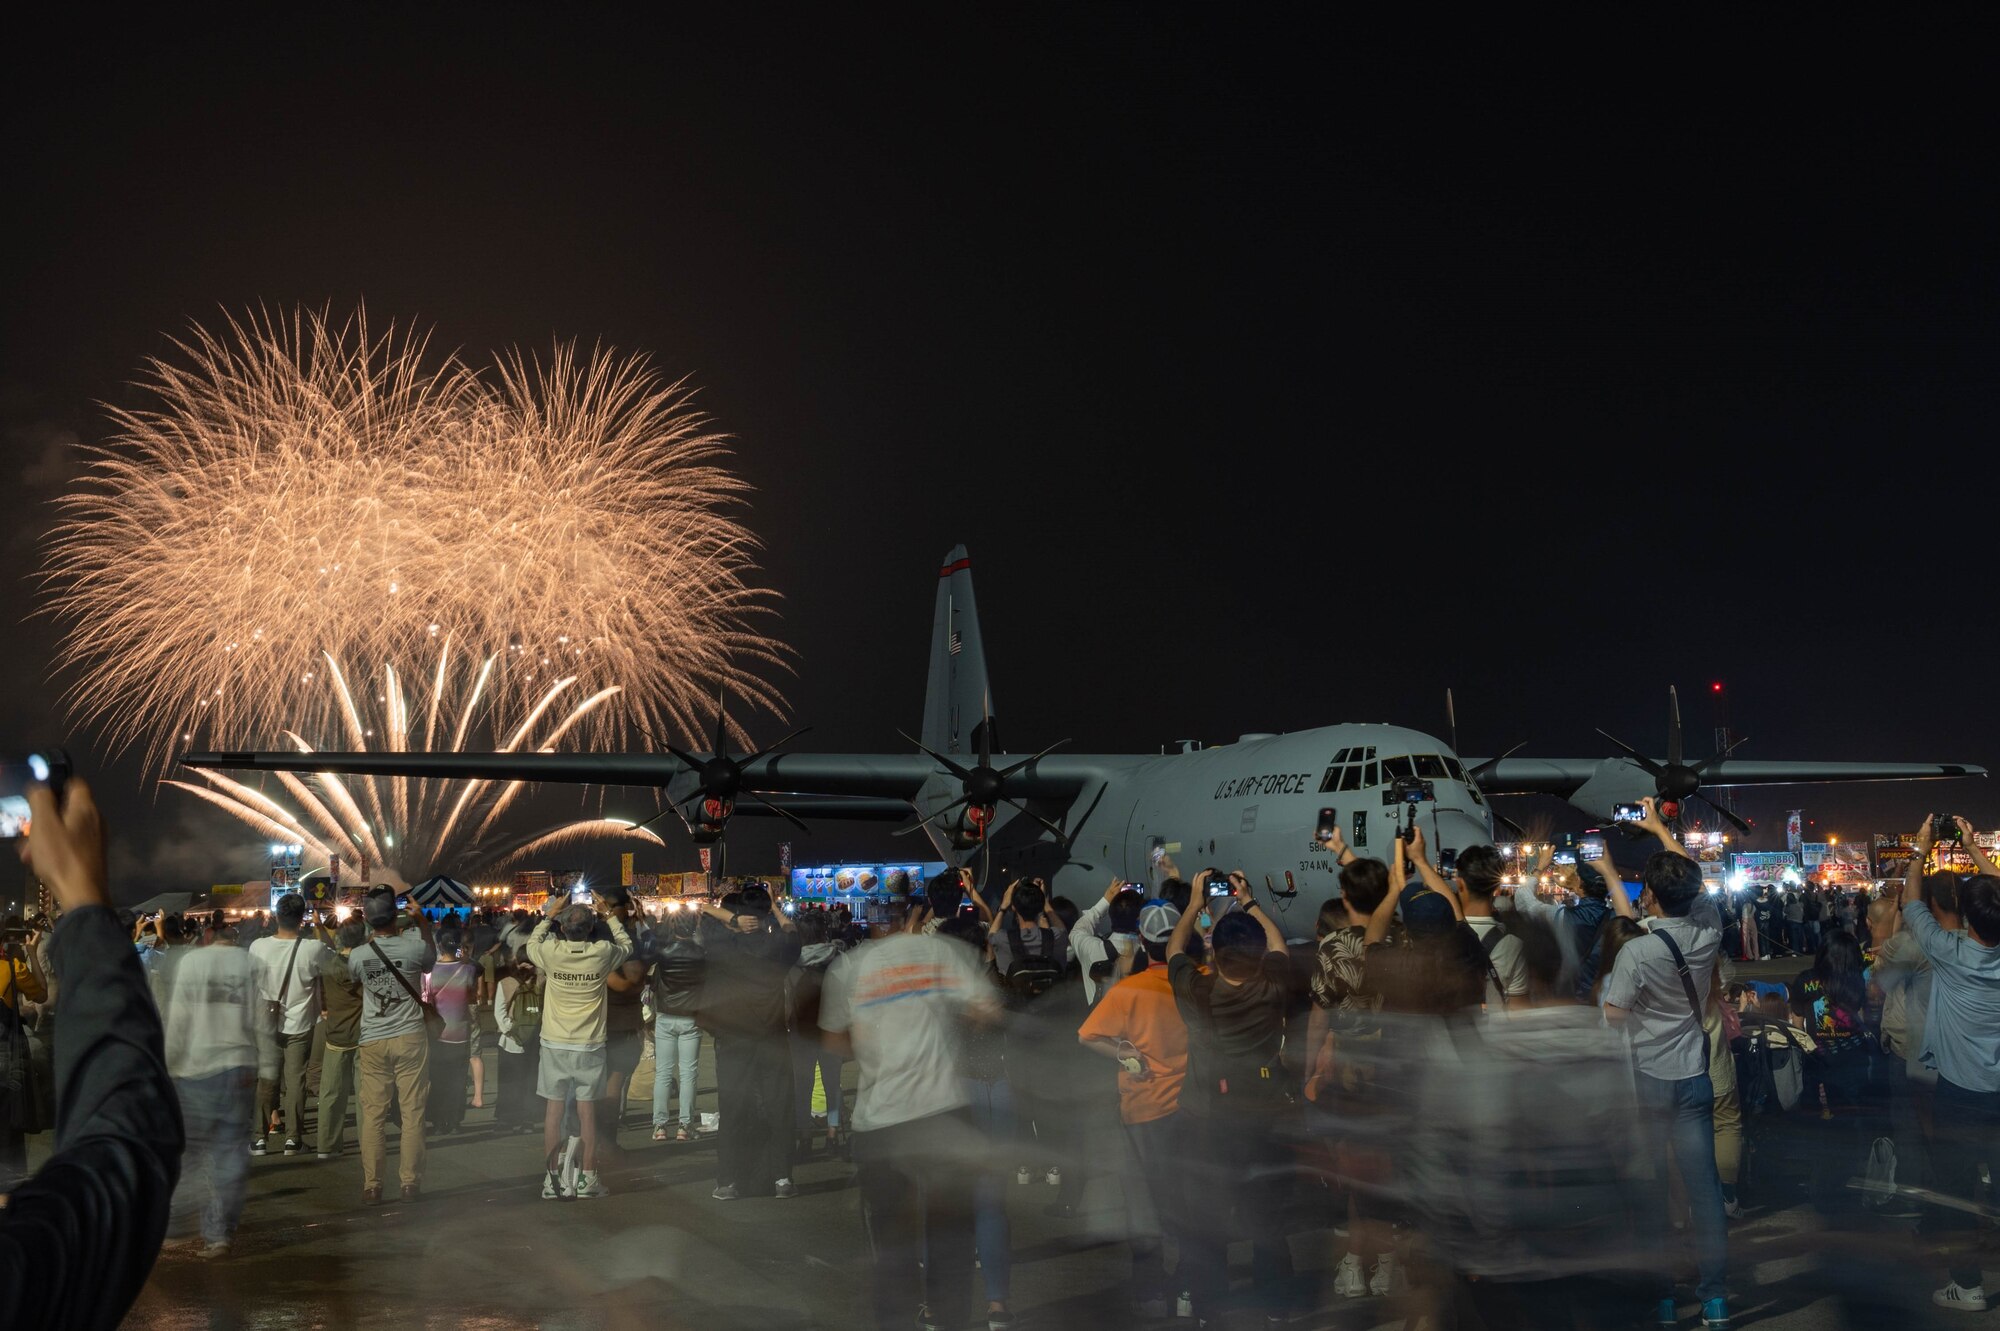 People crowd to watch a fireworks display in front of a C-130 aircraft